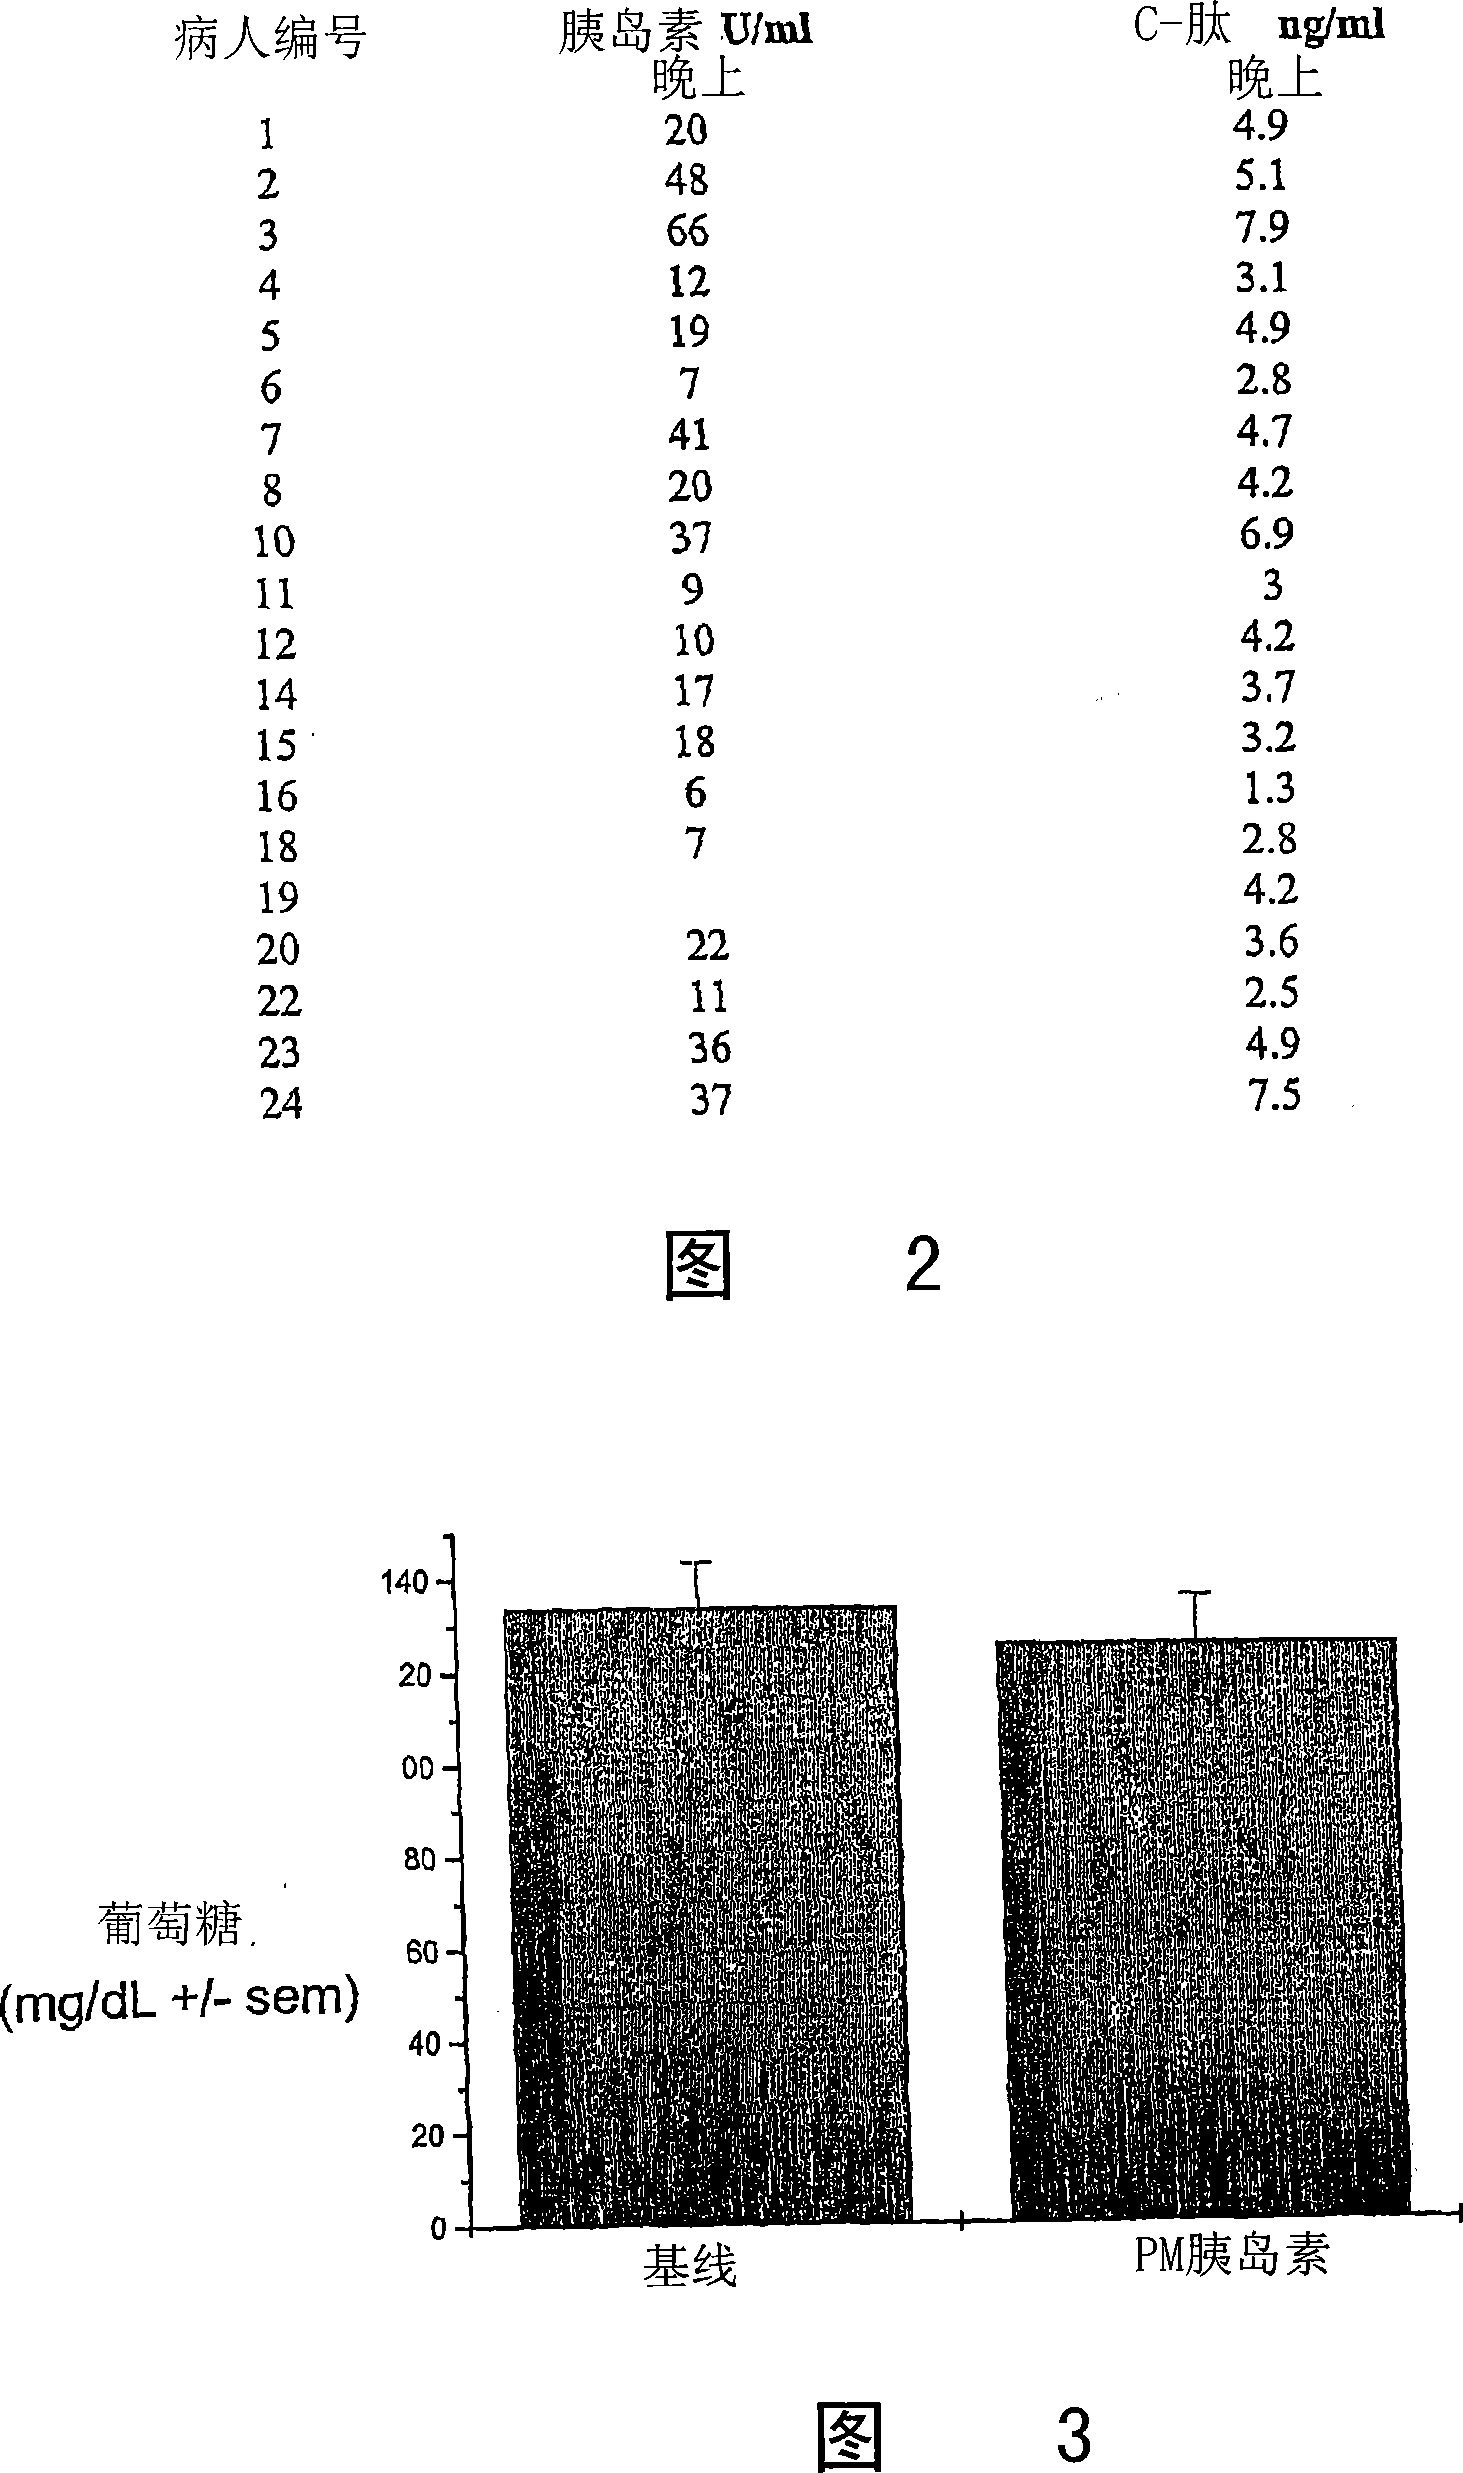 Agent kit containing oral insulin solid therapy